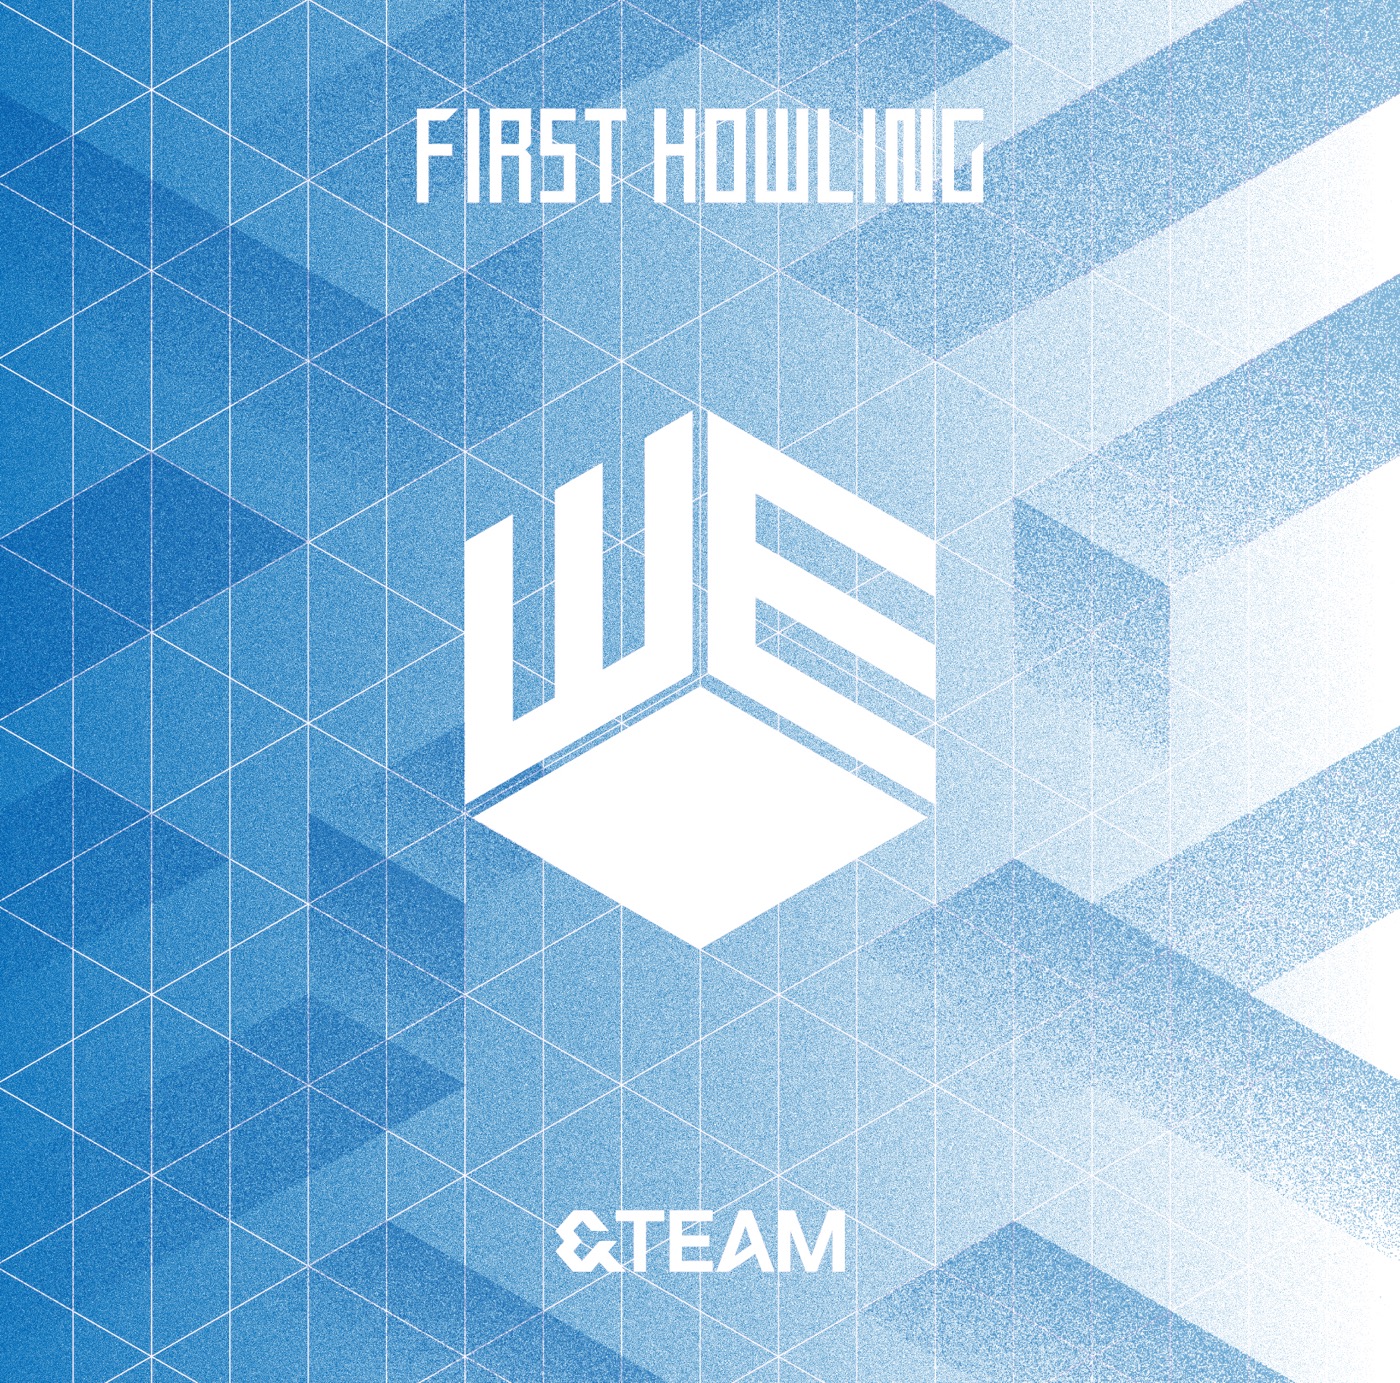 &TEAM、EP『First Howling : WE』がオリコン週間アルバムランキングで首位獲得 - 画像一覧（2/2）